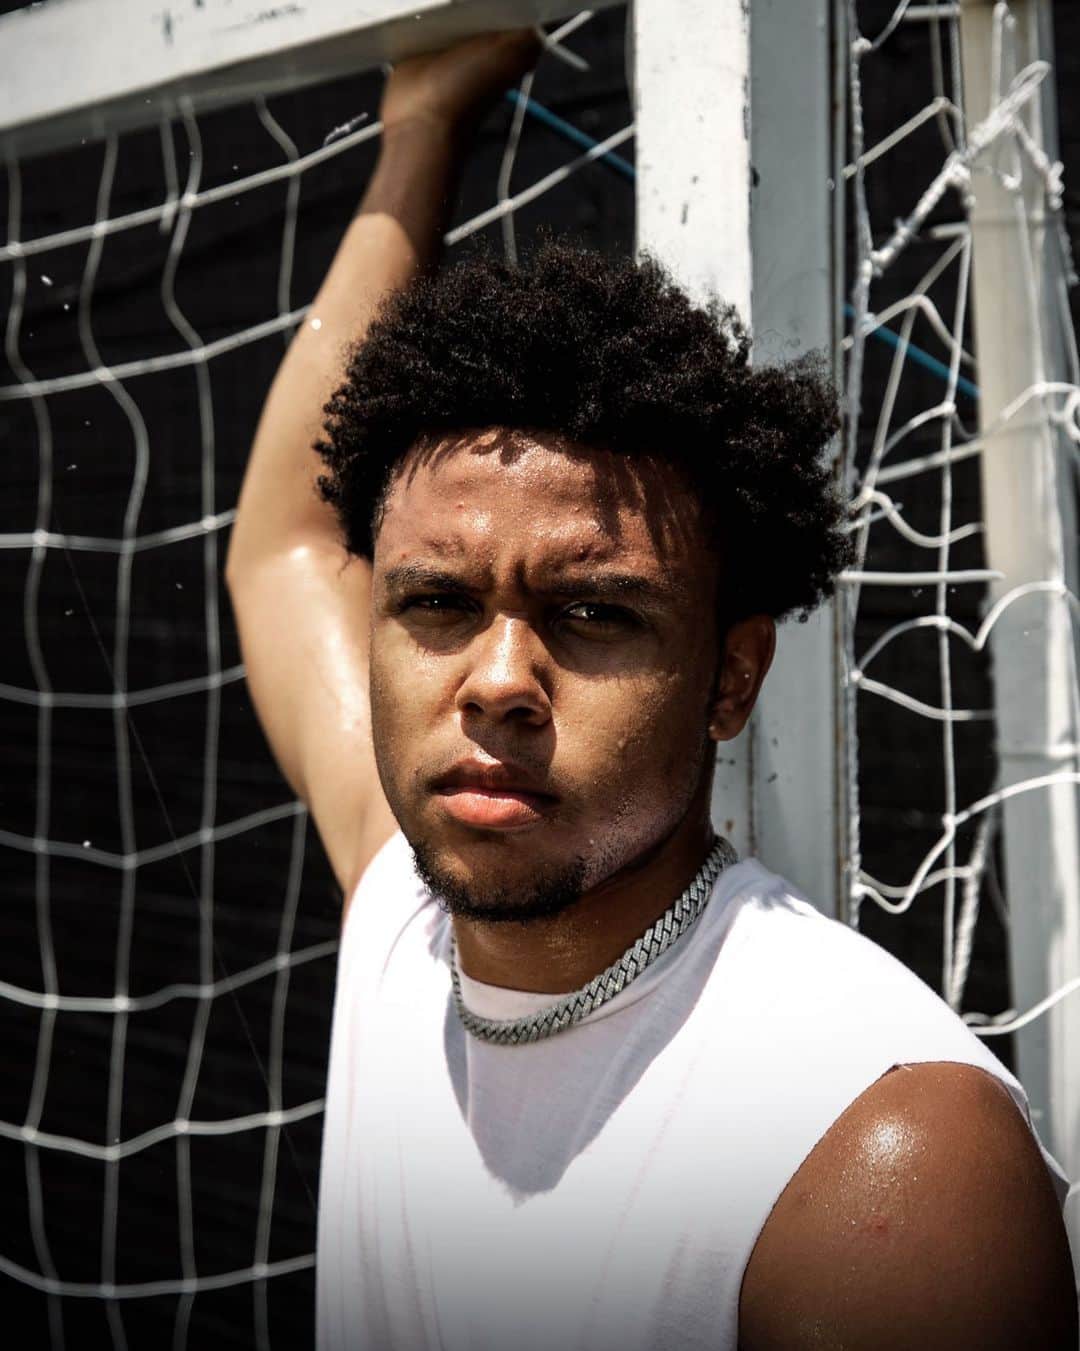 adidasのインスタグラム：「“I don’t want to be just known as a great soccer player. I want to be known as a great human being, as a great person.”⁣⁣⁣ ⁣⁣⁣ @juventus midfielder Weston McKennie (@west.mckennie) shares the importance of building a legacy beyond the pitch in the newest episode of #ReadyForChange.⁣⁣⁣ ⁣⁣ Watch now on @adidasfootball  Photo by @cdiazmiami」